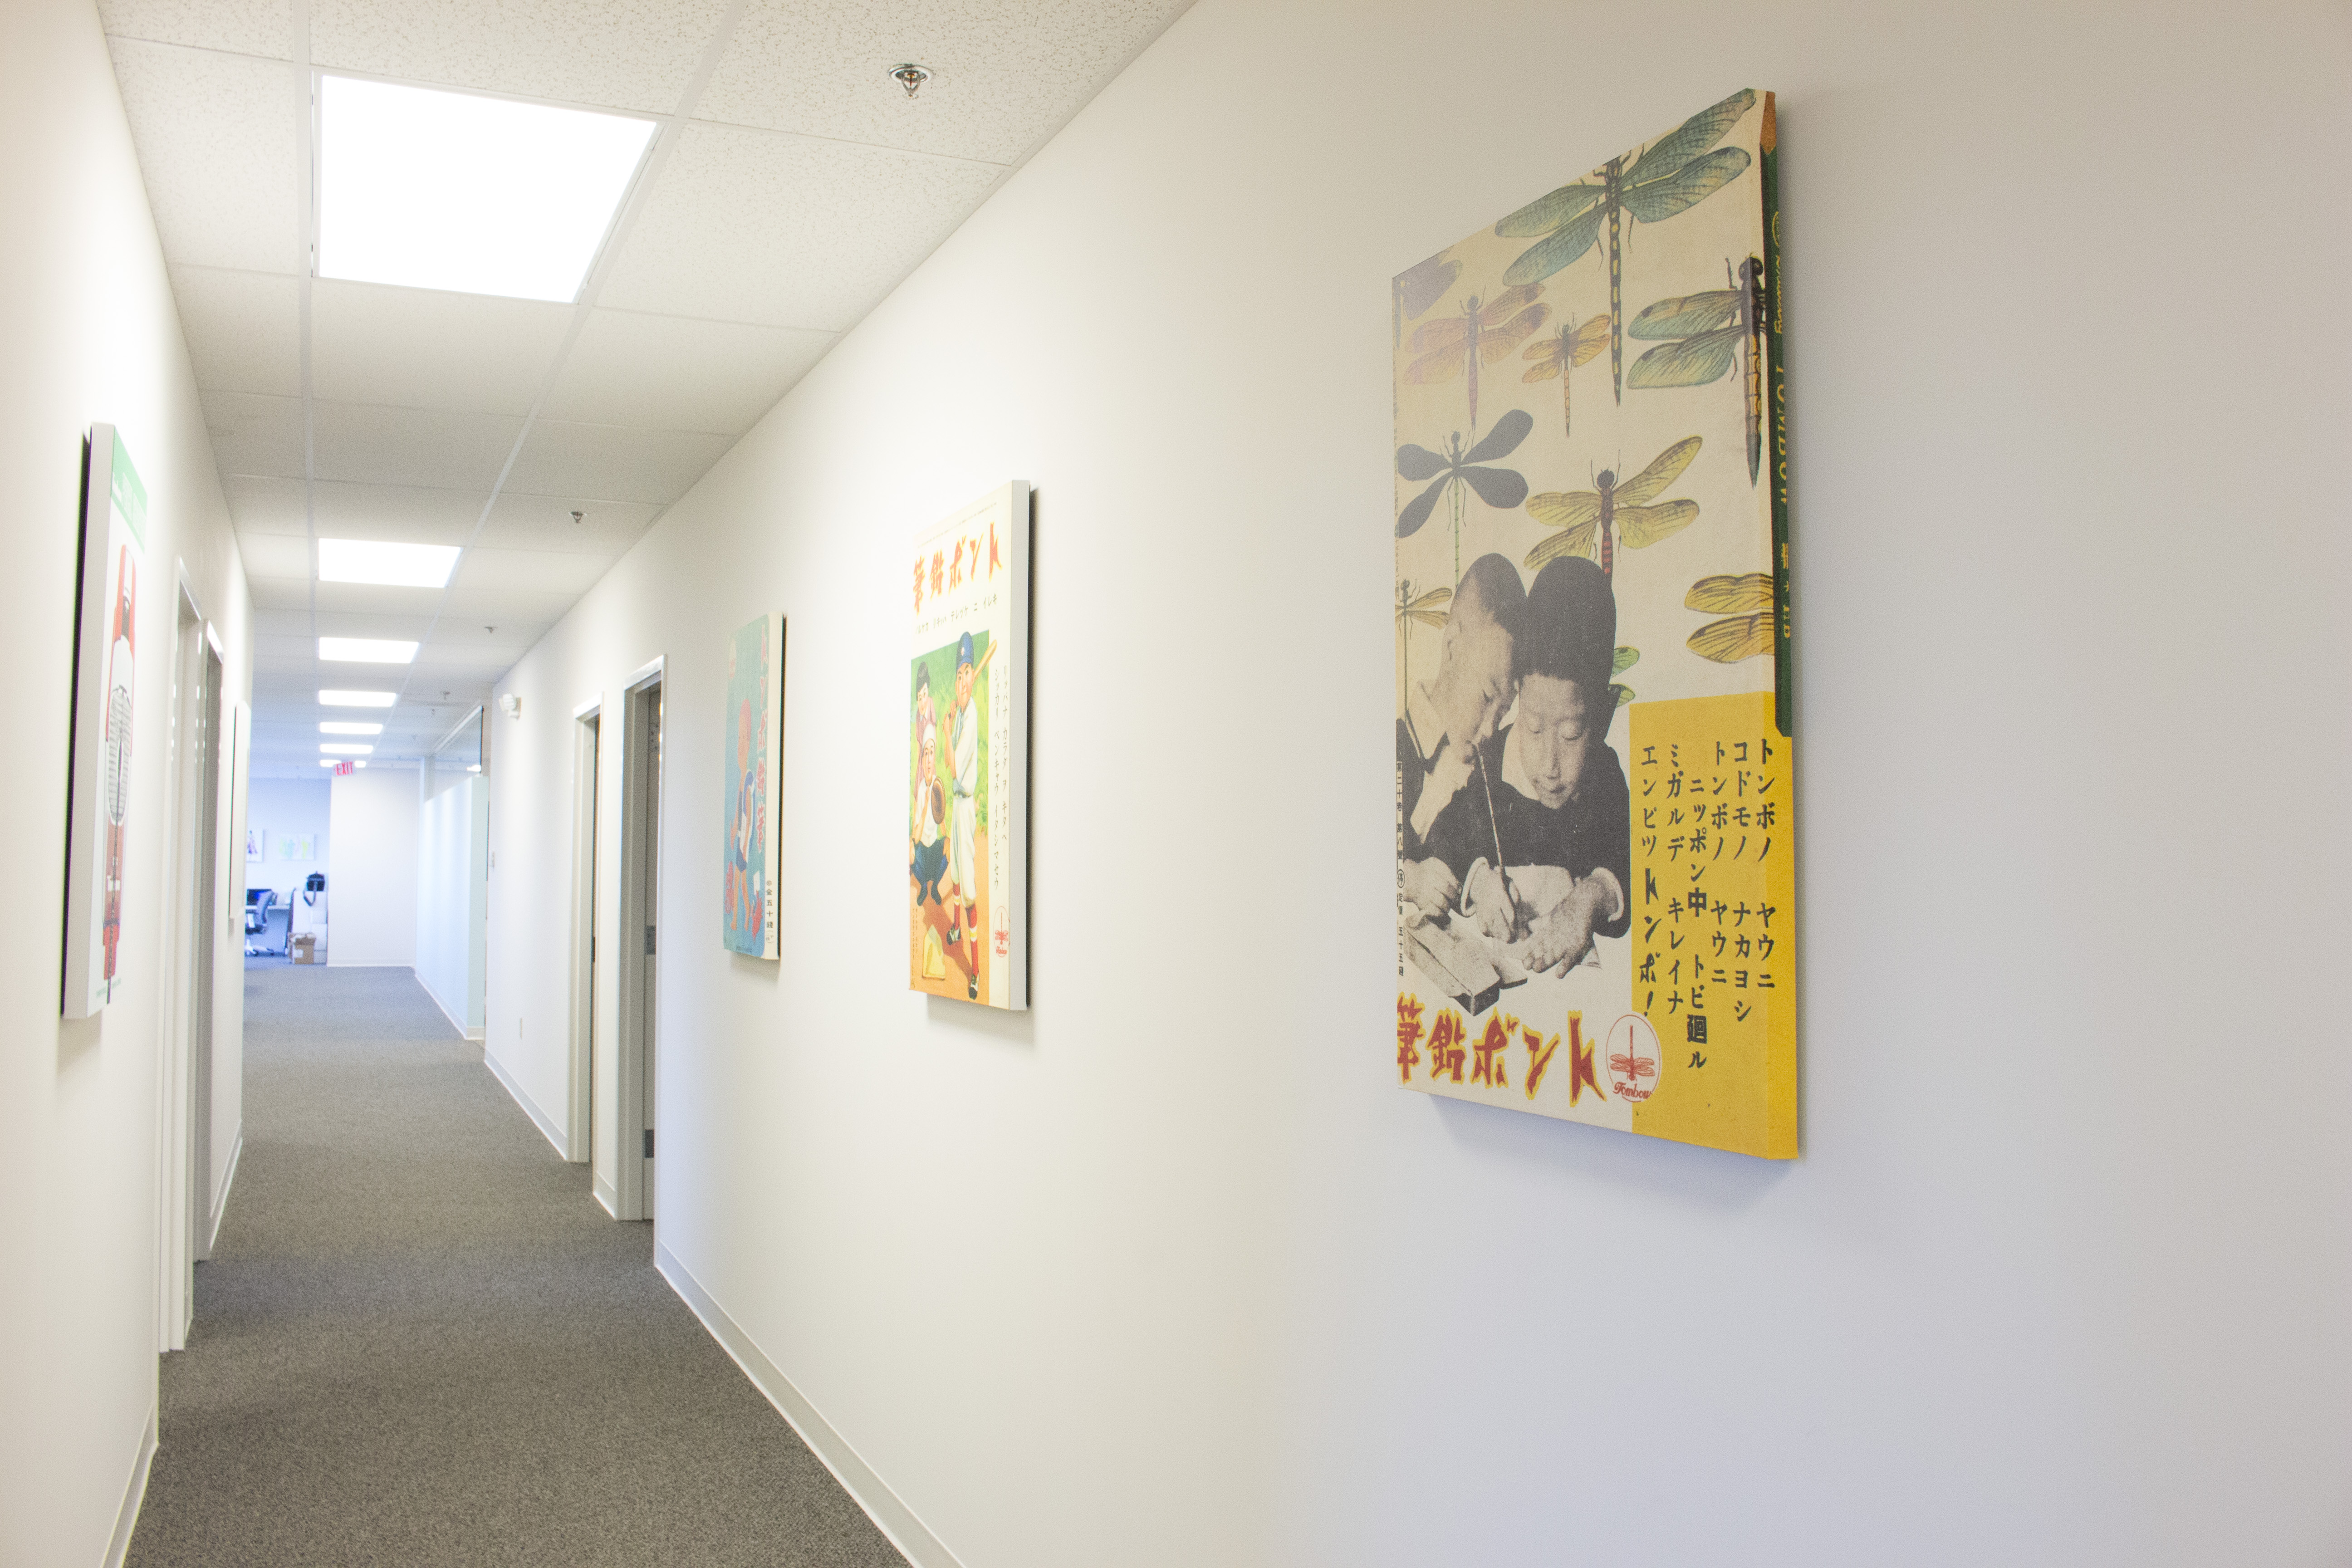 Take a virtual tour of the Tombow USA office space, complete with artwork by Tombow's Brand Ambassadors, printed on canvas by Mixbook